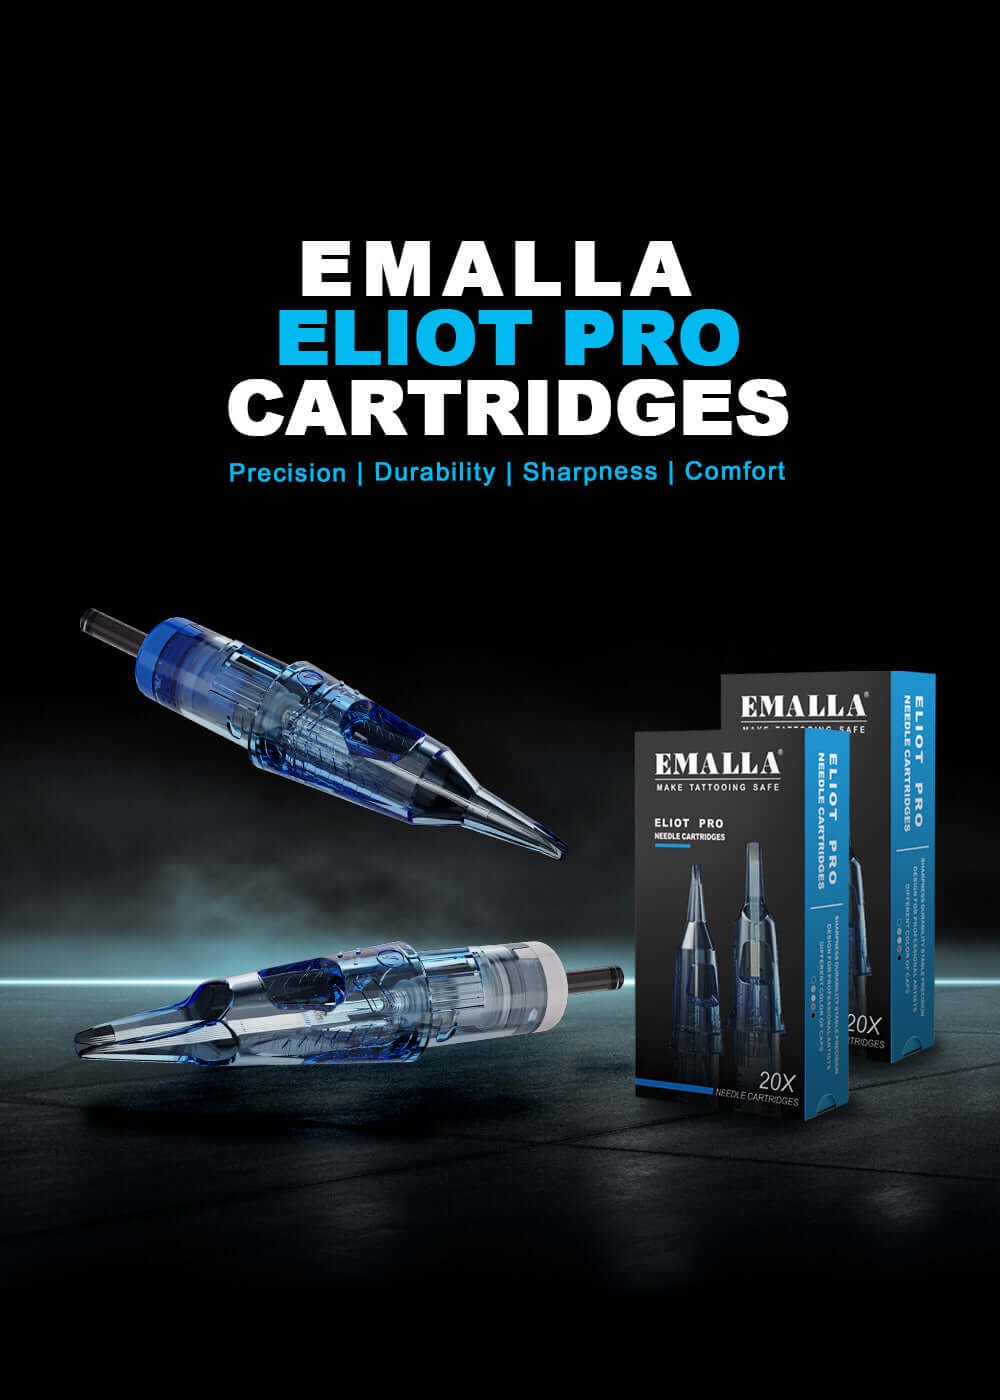 Promotional Image of EMALLA ELIOT PRO Tattoo Cartridges with precision, durability, sharpness and comfort